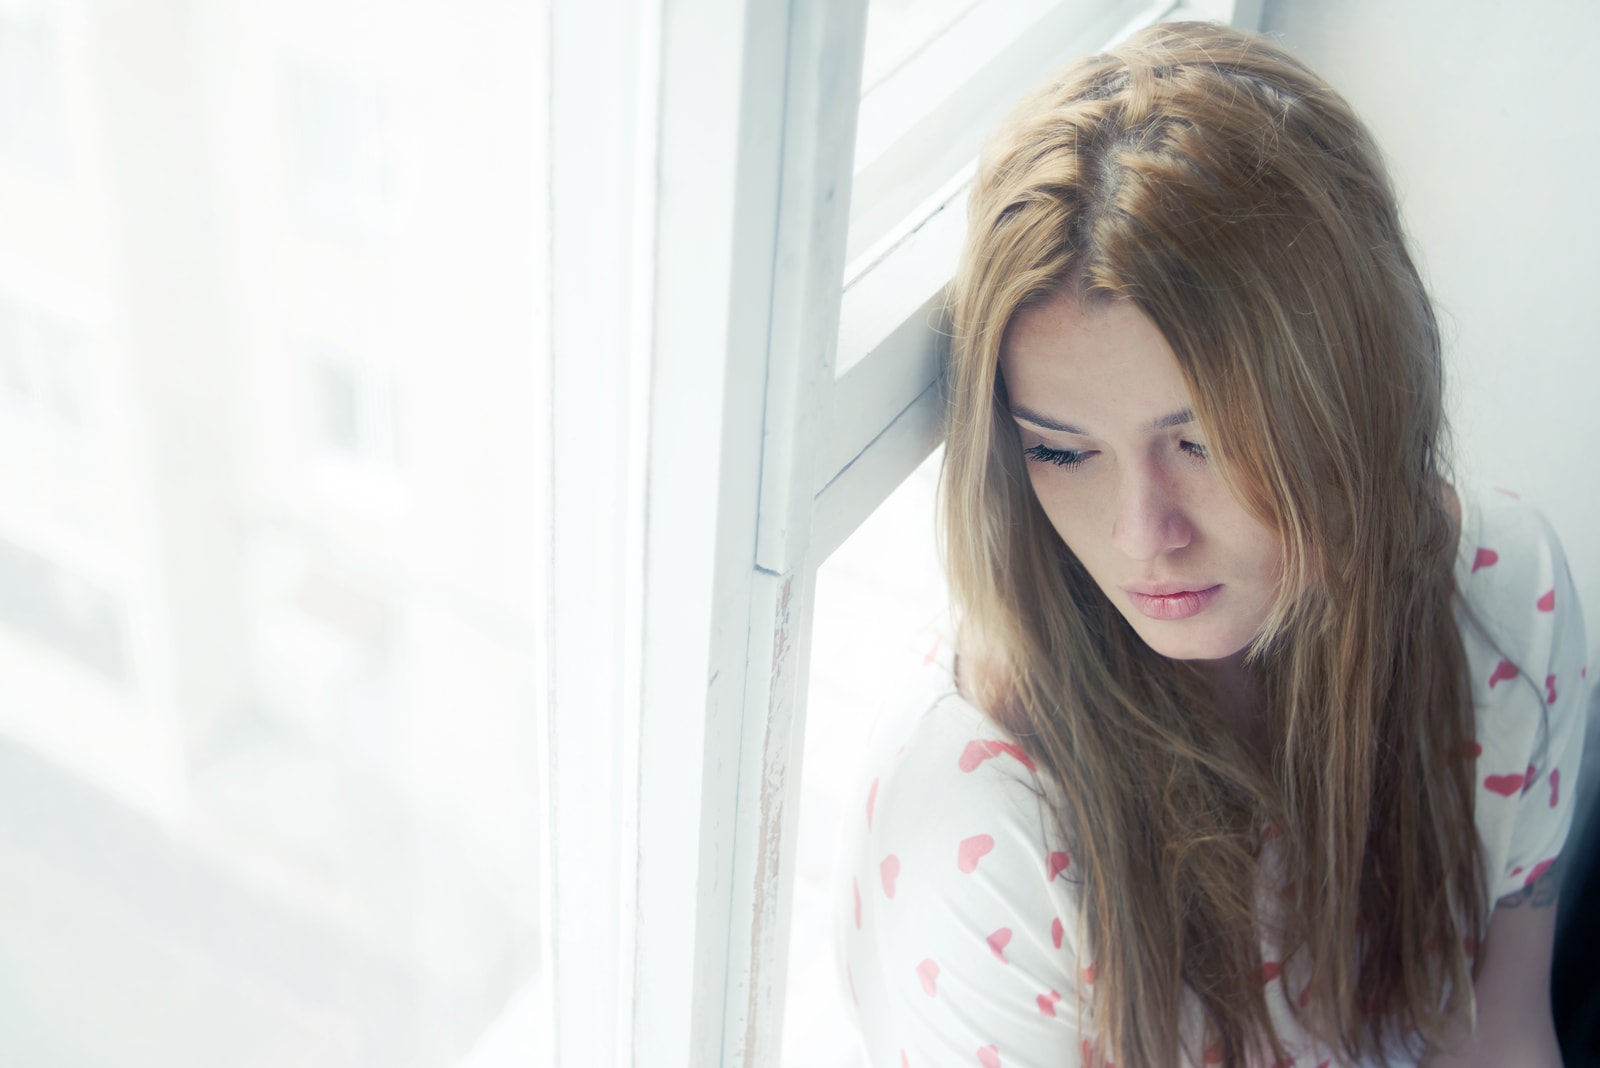 pensive sad woman looking out of window